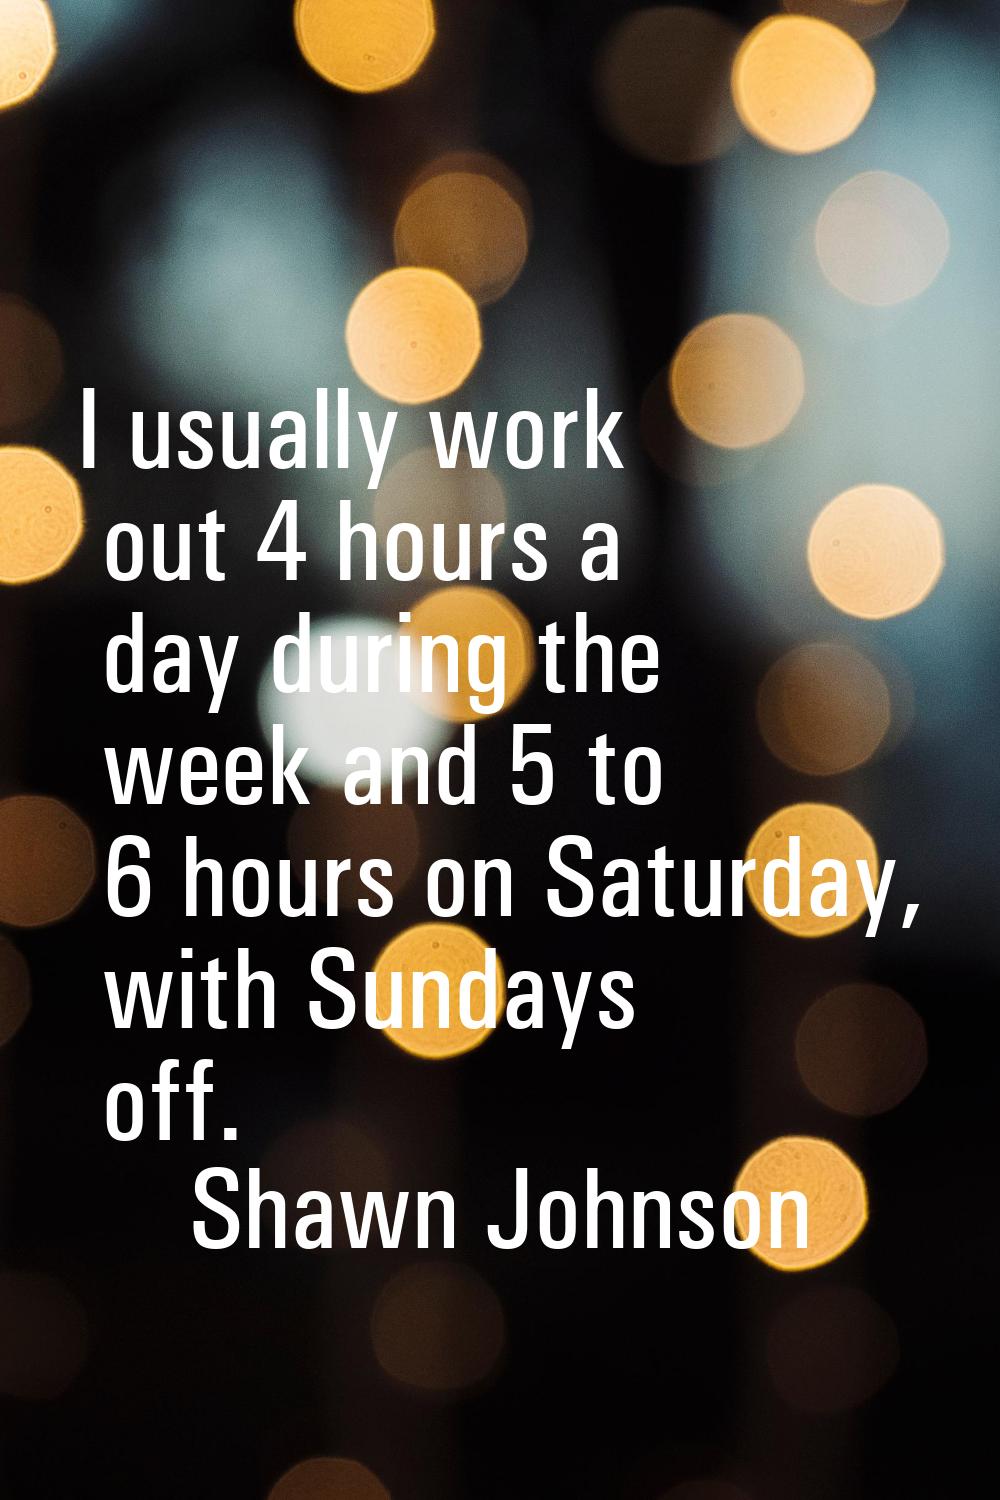 I usually work out 4 hours a day during the week and 5 to 6 hours on Saturday, with Sundays off.